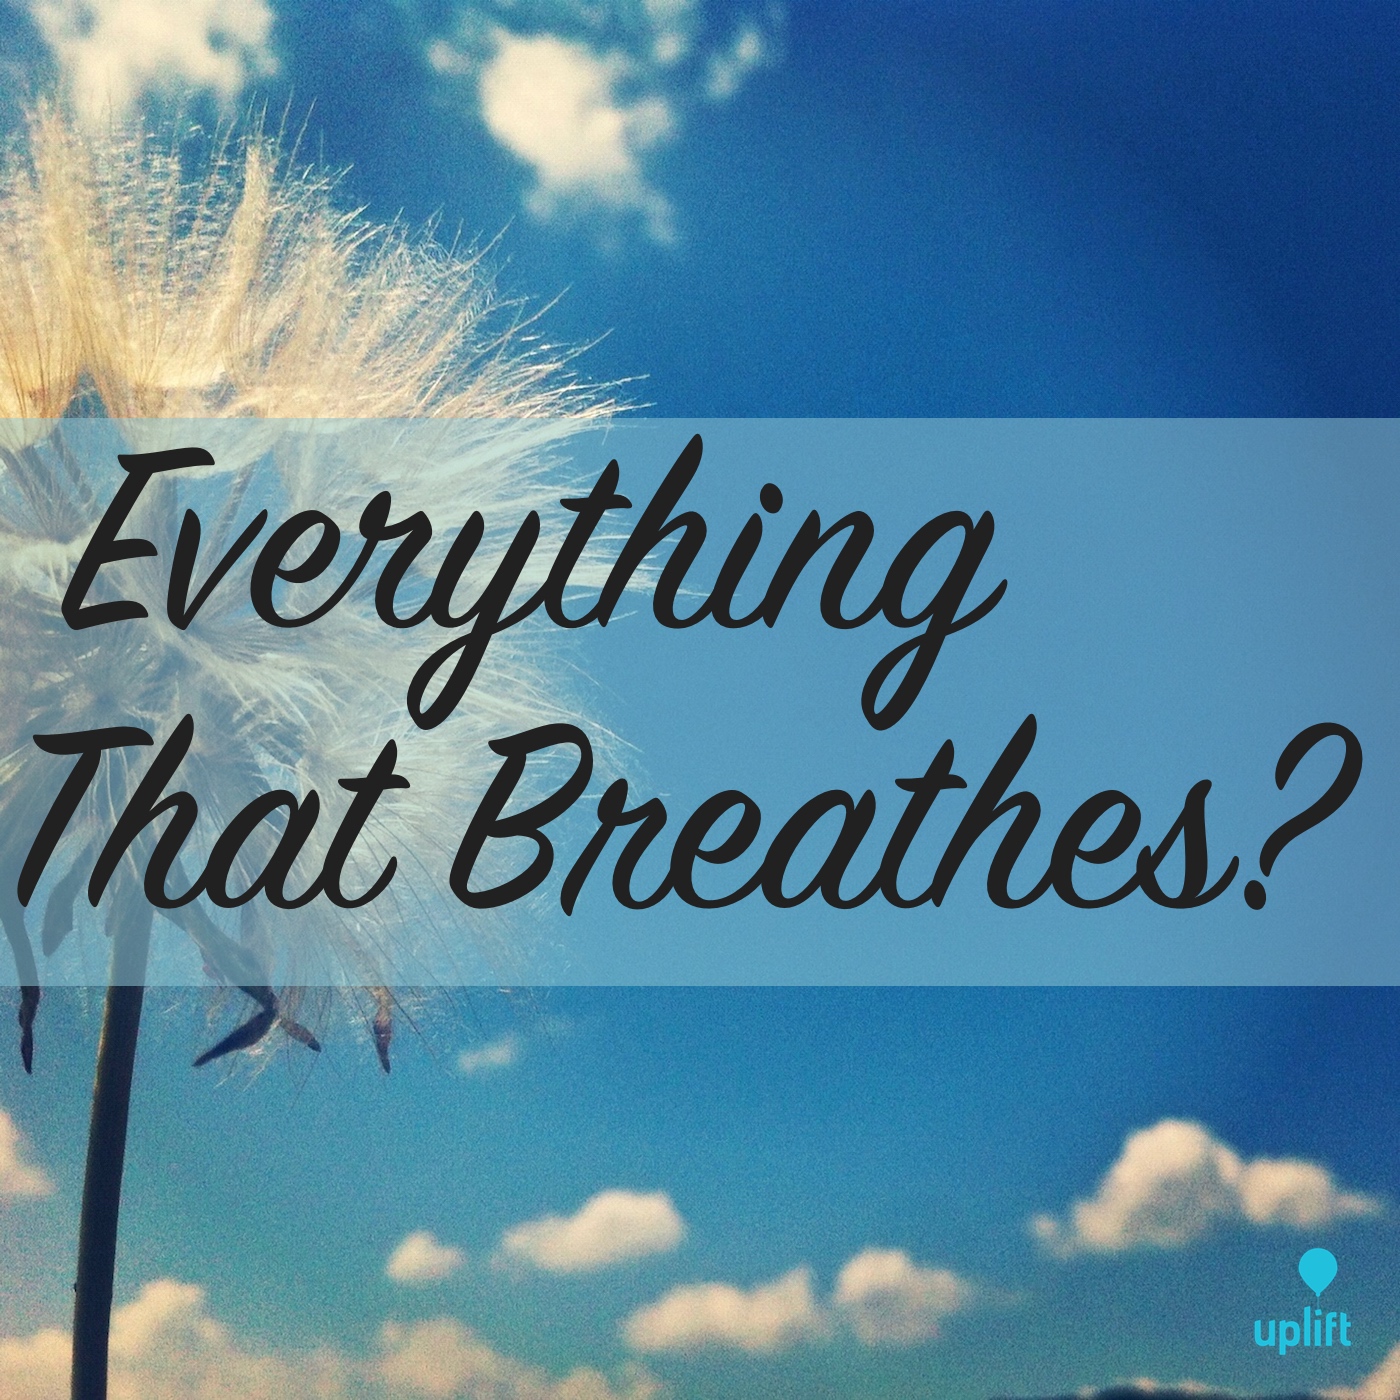 Episode 8: Everything That Breathes?